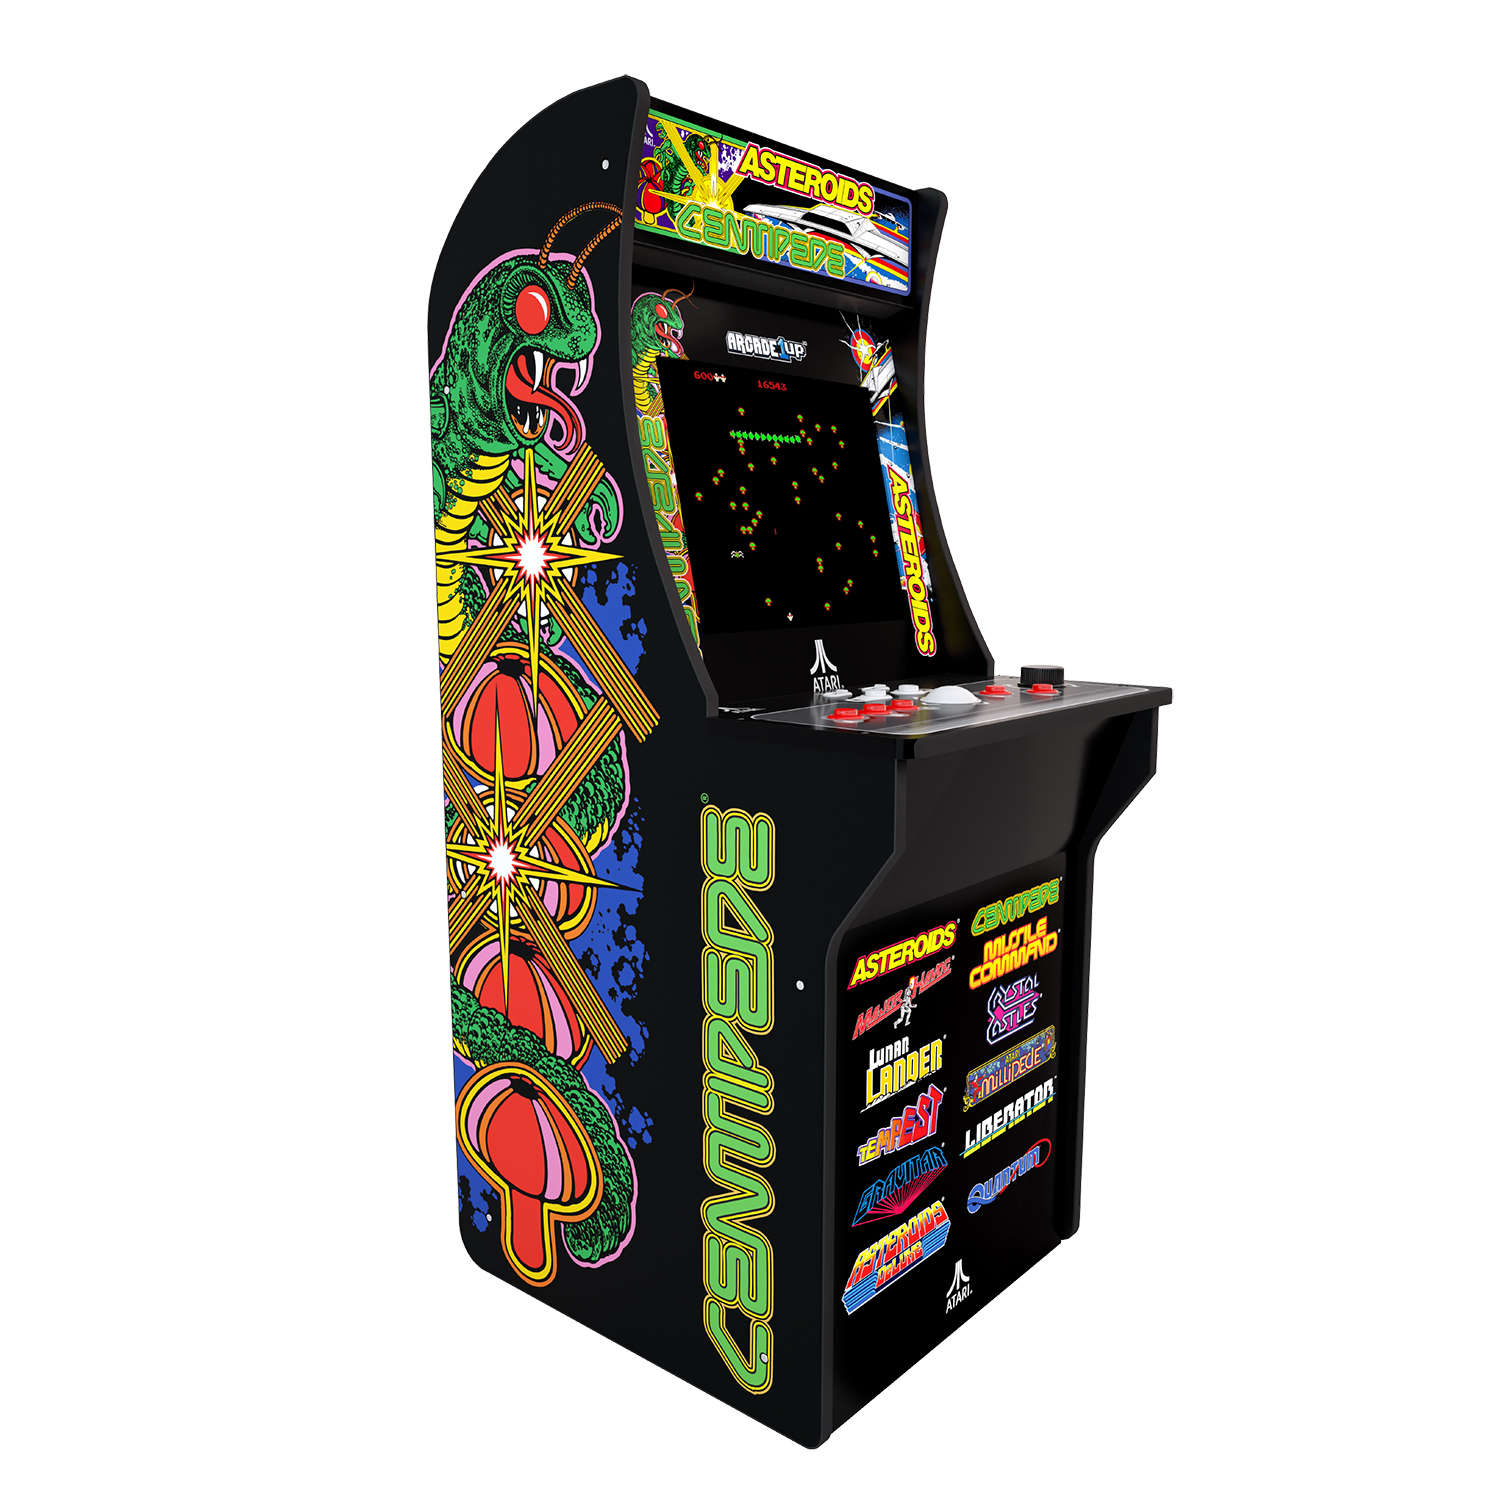 Deluxe 12-in-1 Arcade Machine with Riser, Arcade1UP, Atari Graphics - image 1 of 5